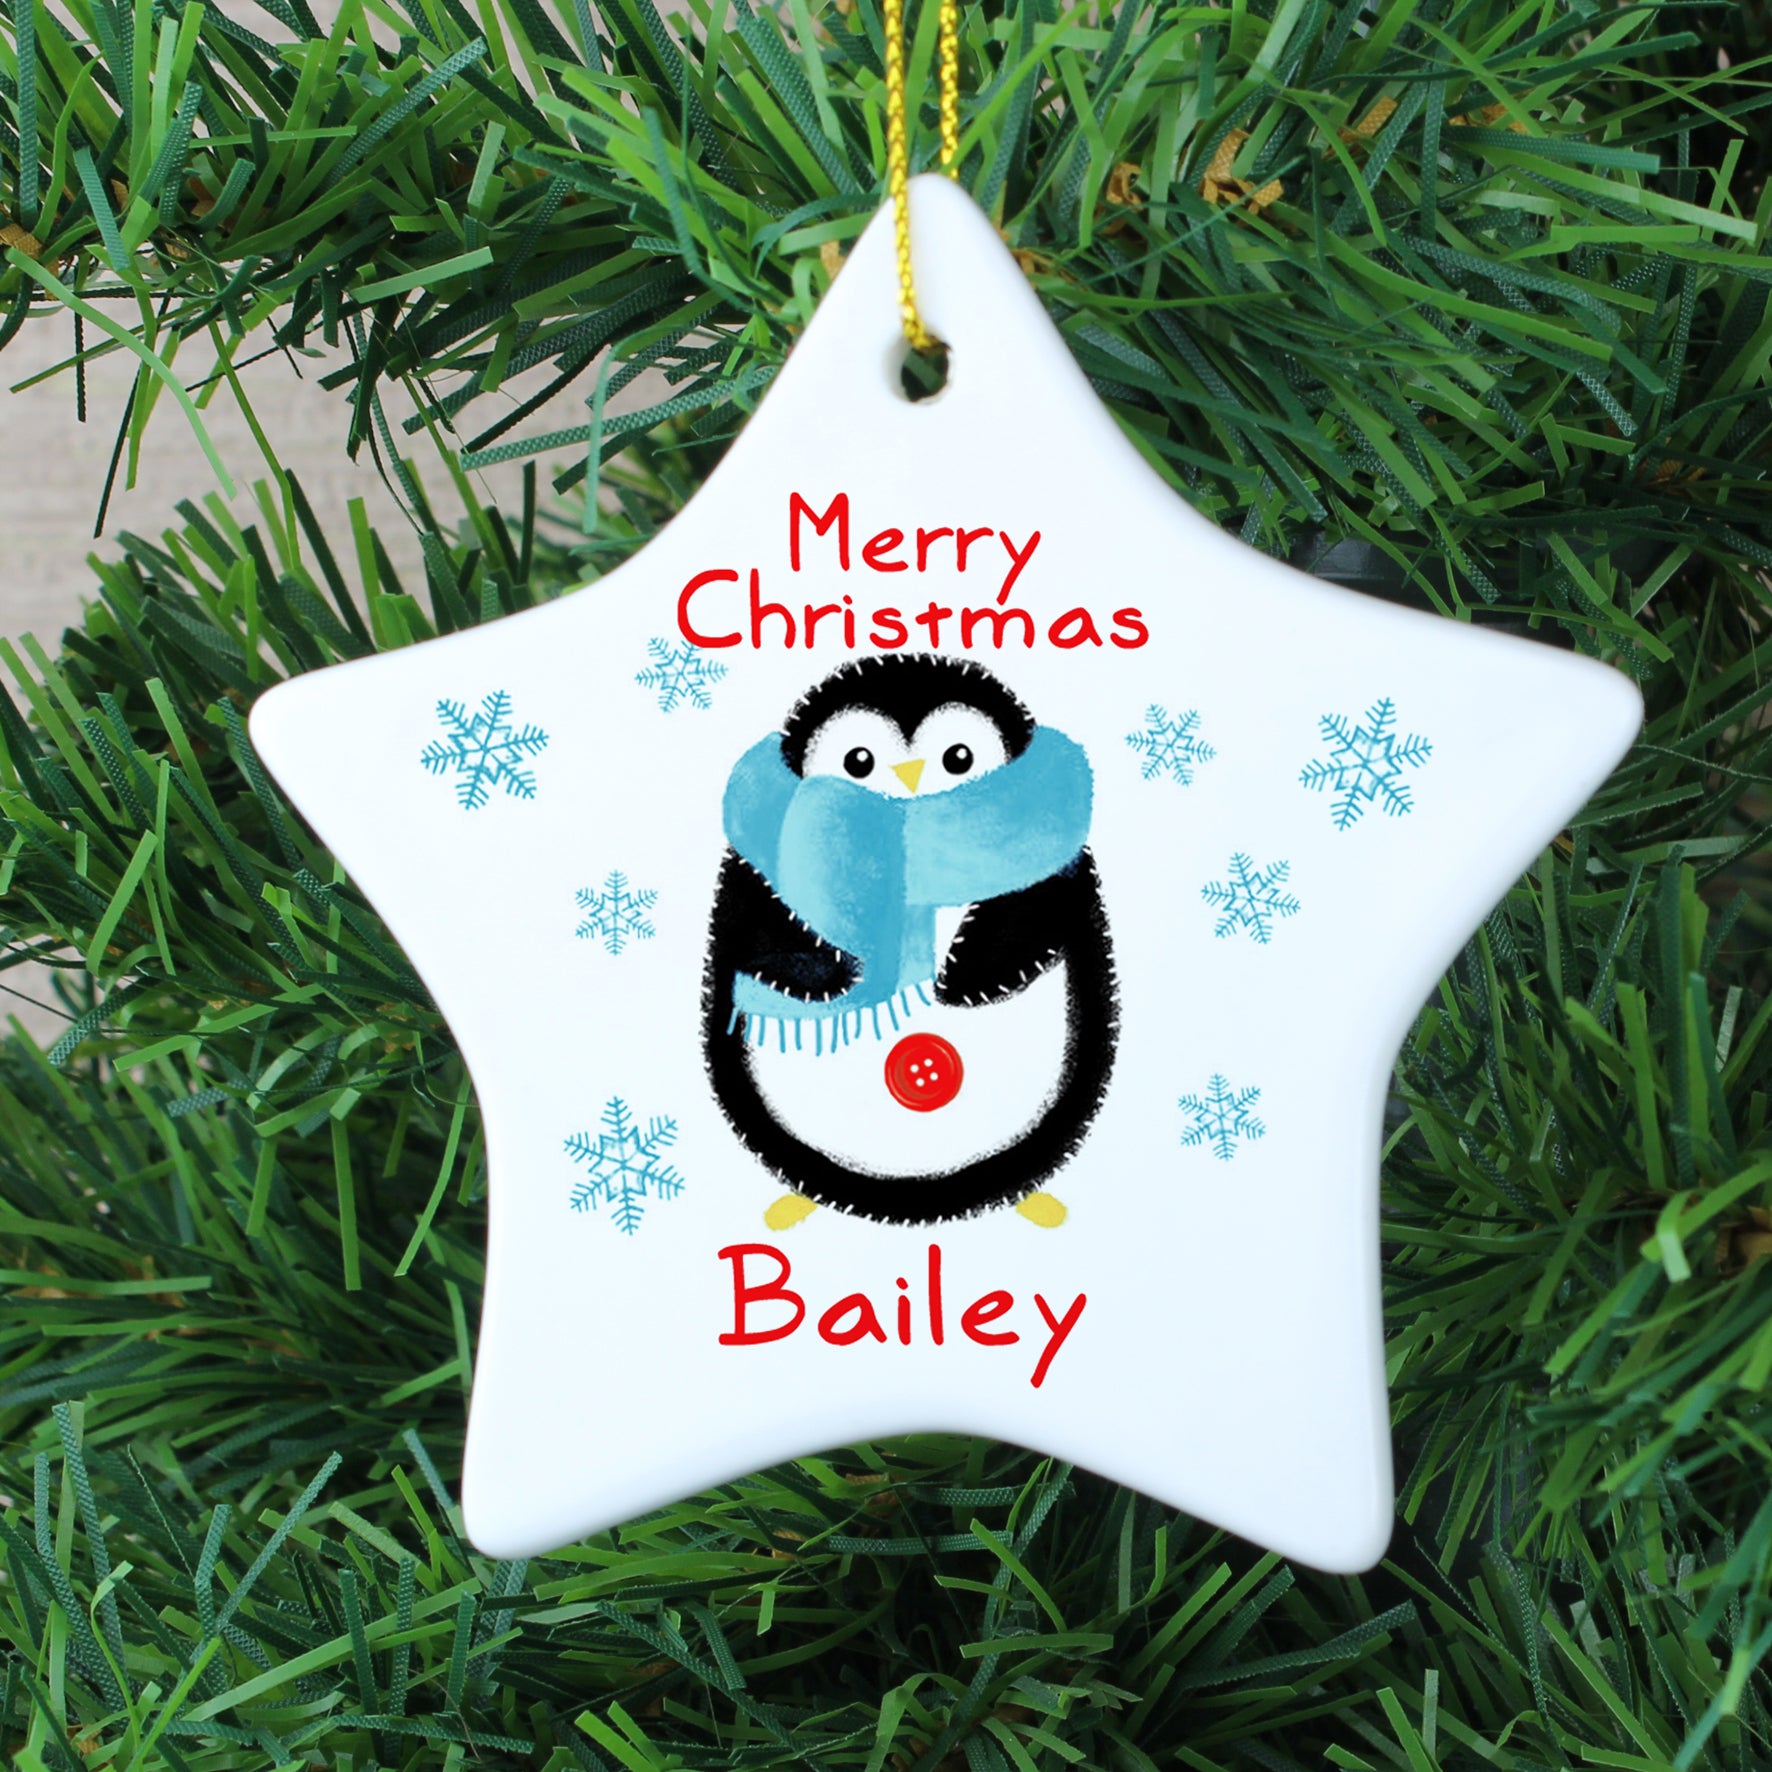 Personalised white ceramic Chrismas star decoration featuring the words 'Merry Christmas' in a red font and an image of a hand drawn penguin wearing a blue scarf. The decoration can be personalised with a name in red which will be printed below the image of the penguin.